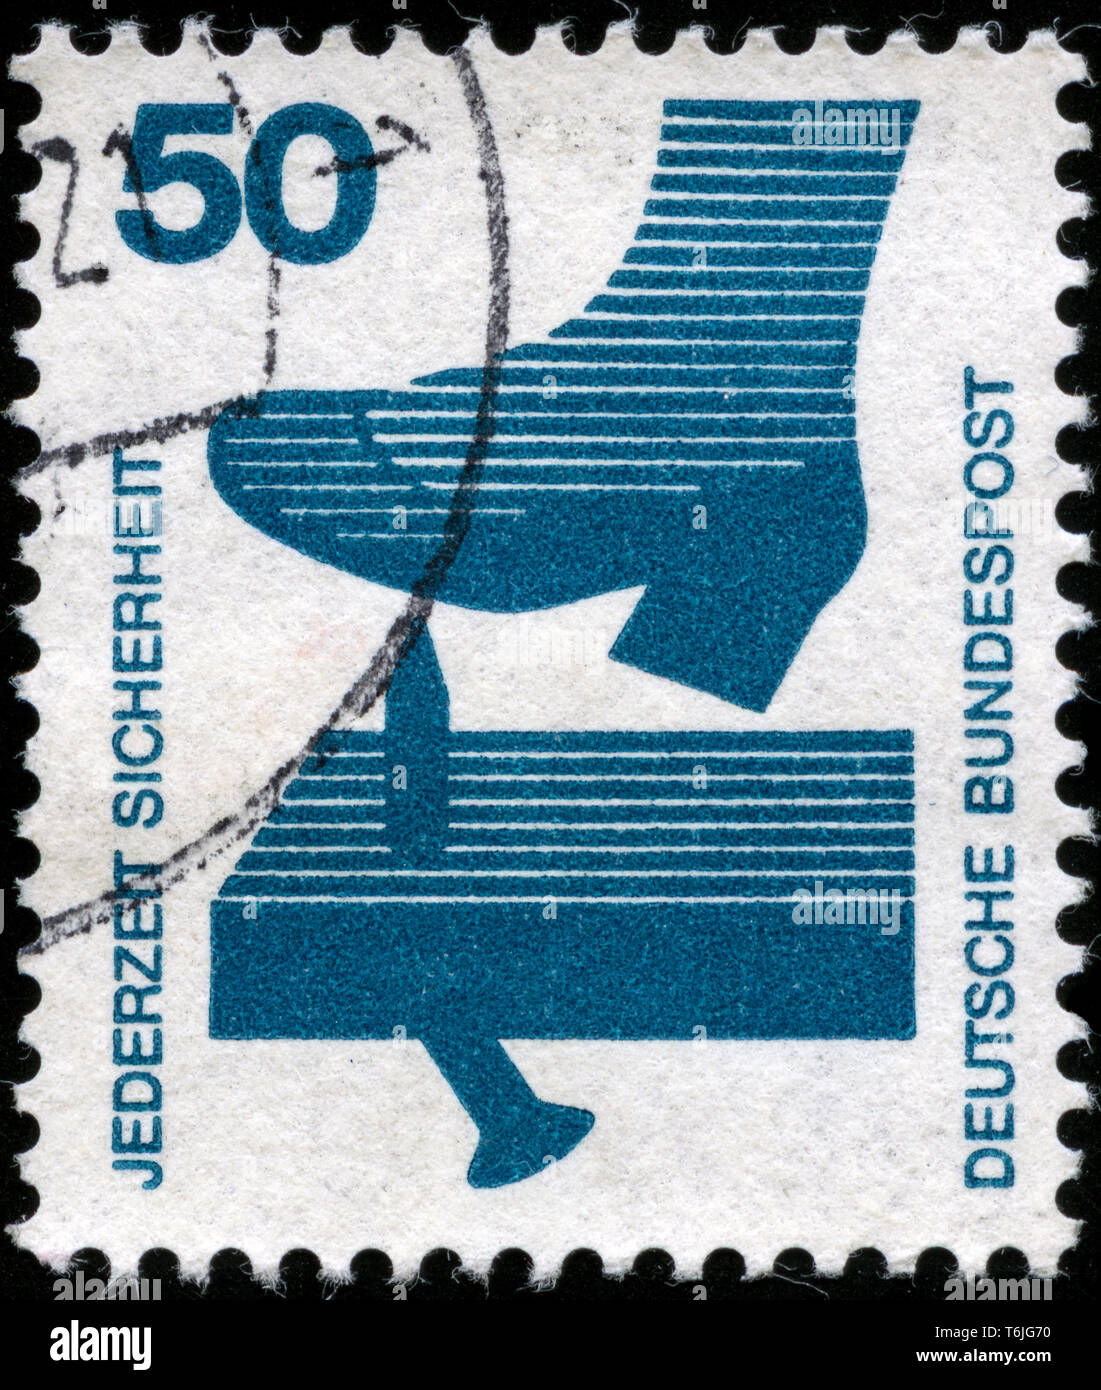 Postage stamp from the Federal Republic of Germany in the Prevent accidents series issued in 1973 Stock Photo